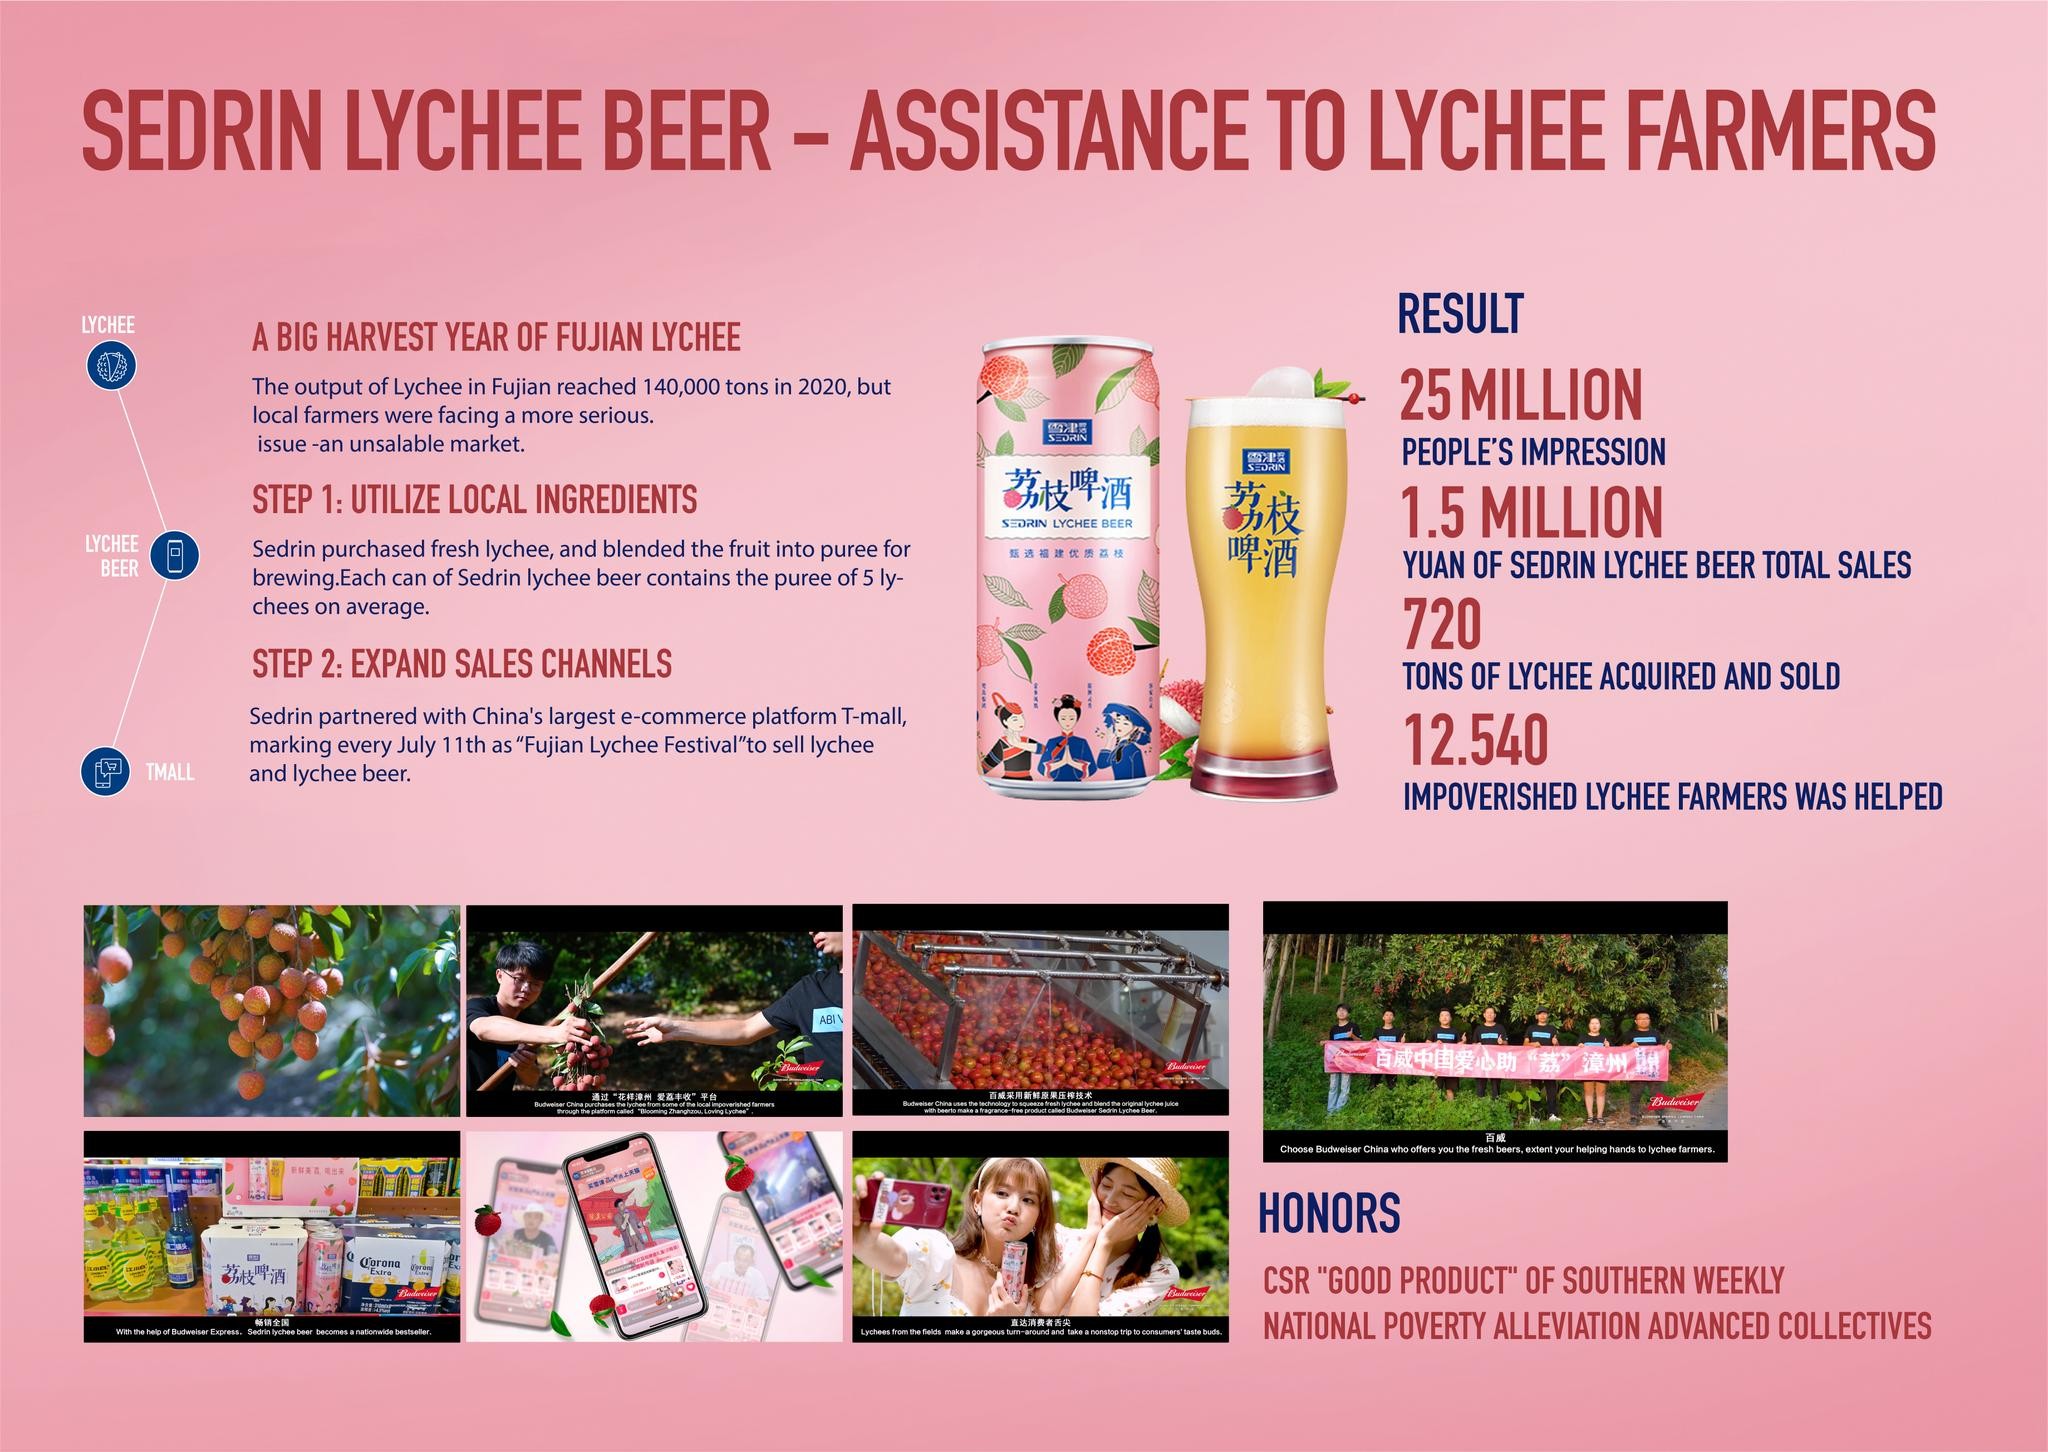 Sedrin Lychee Beer - Assistance to Lychee Farmers